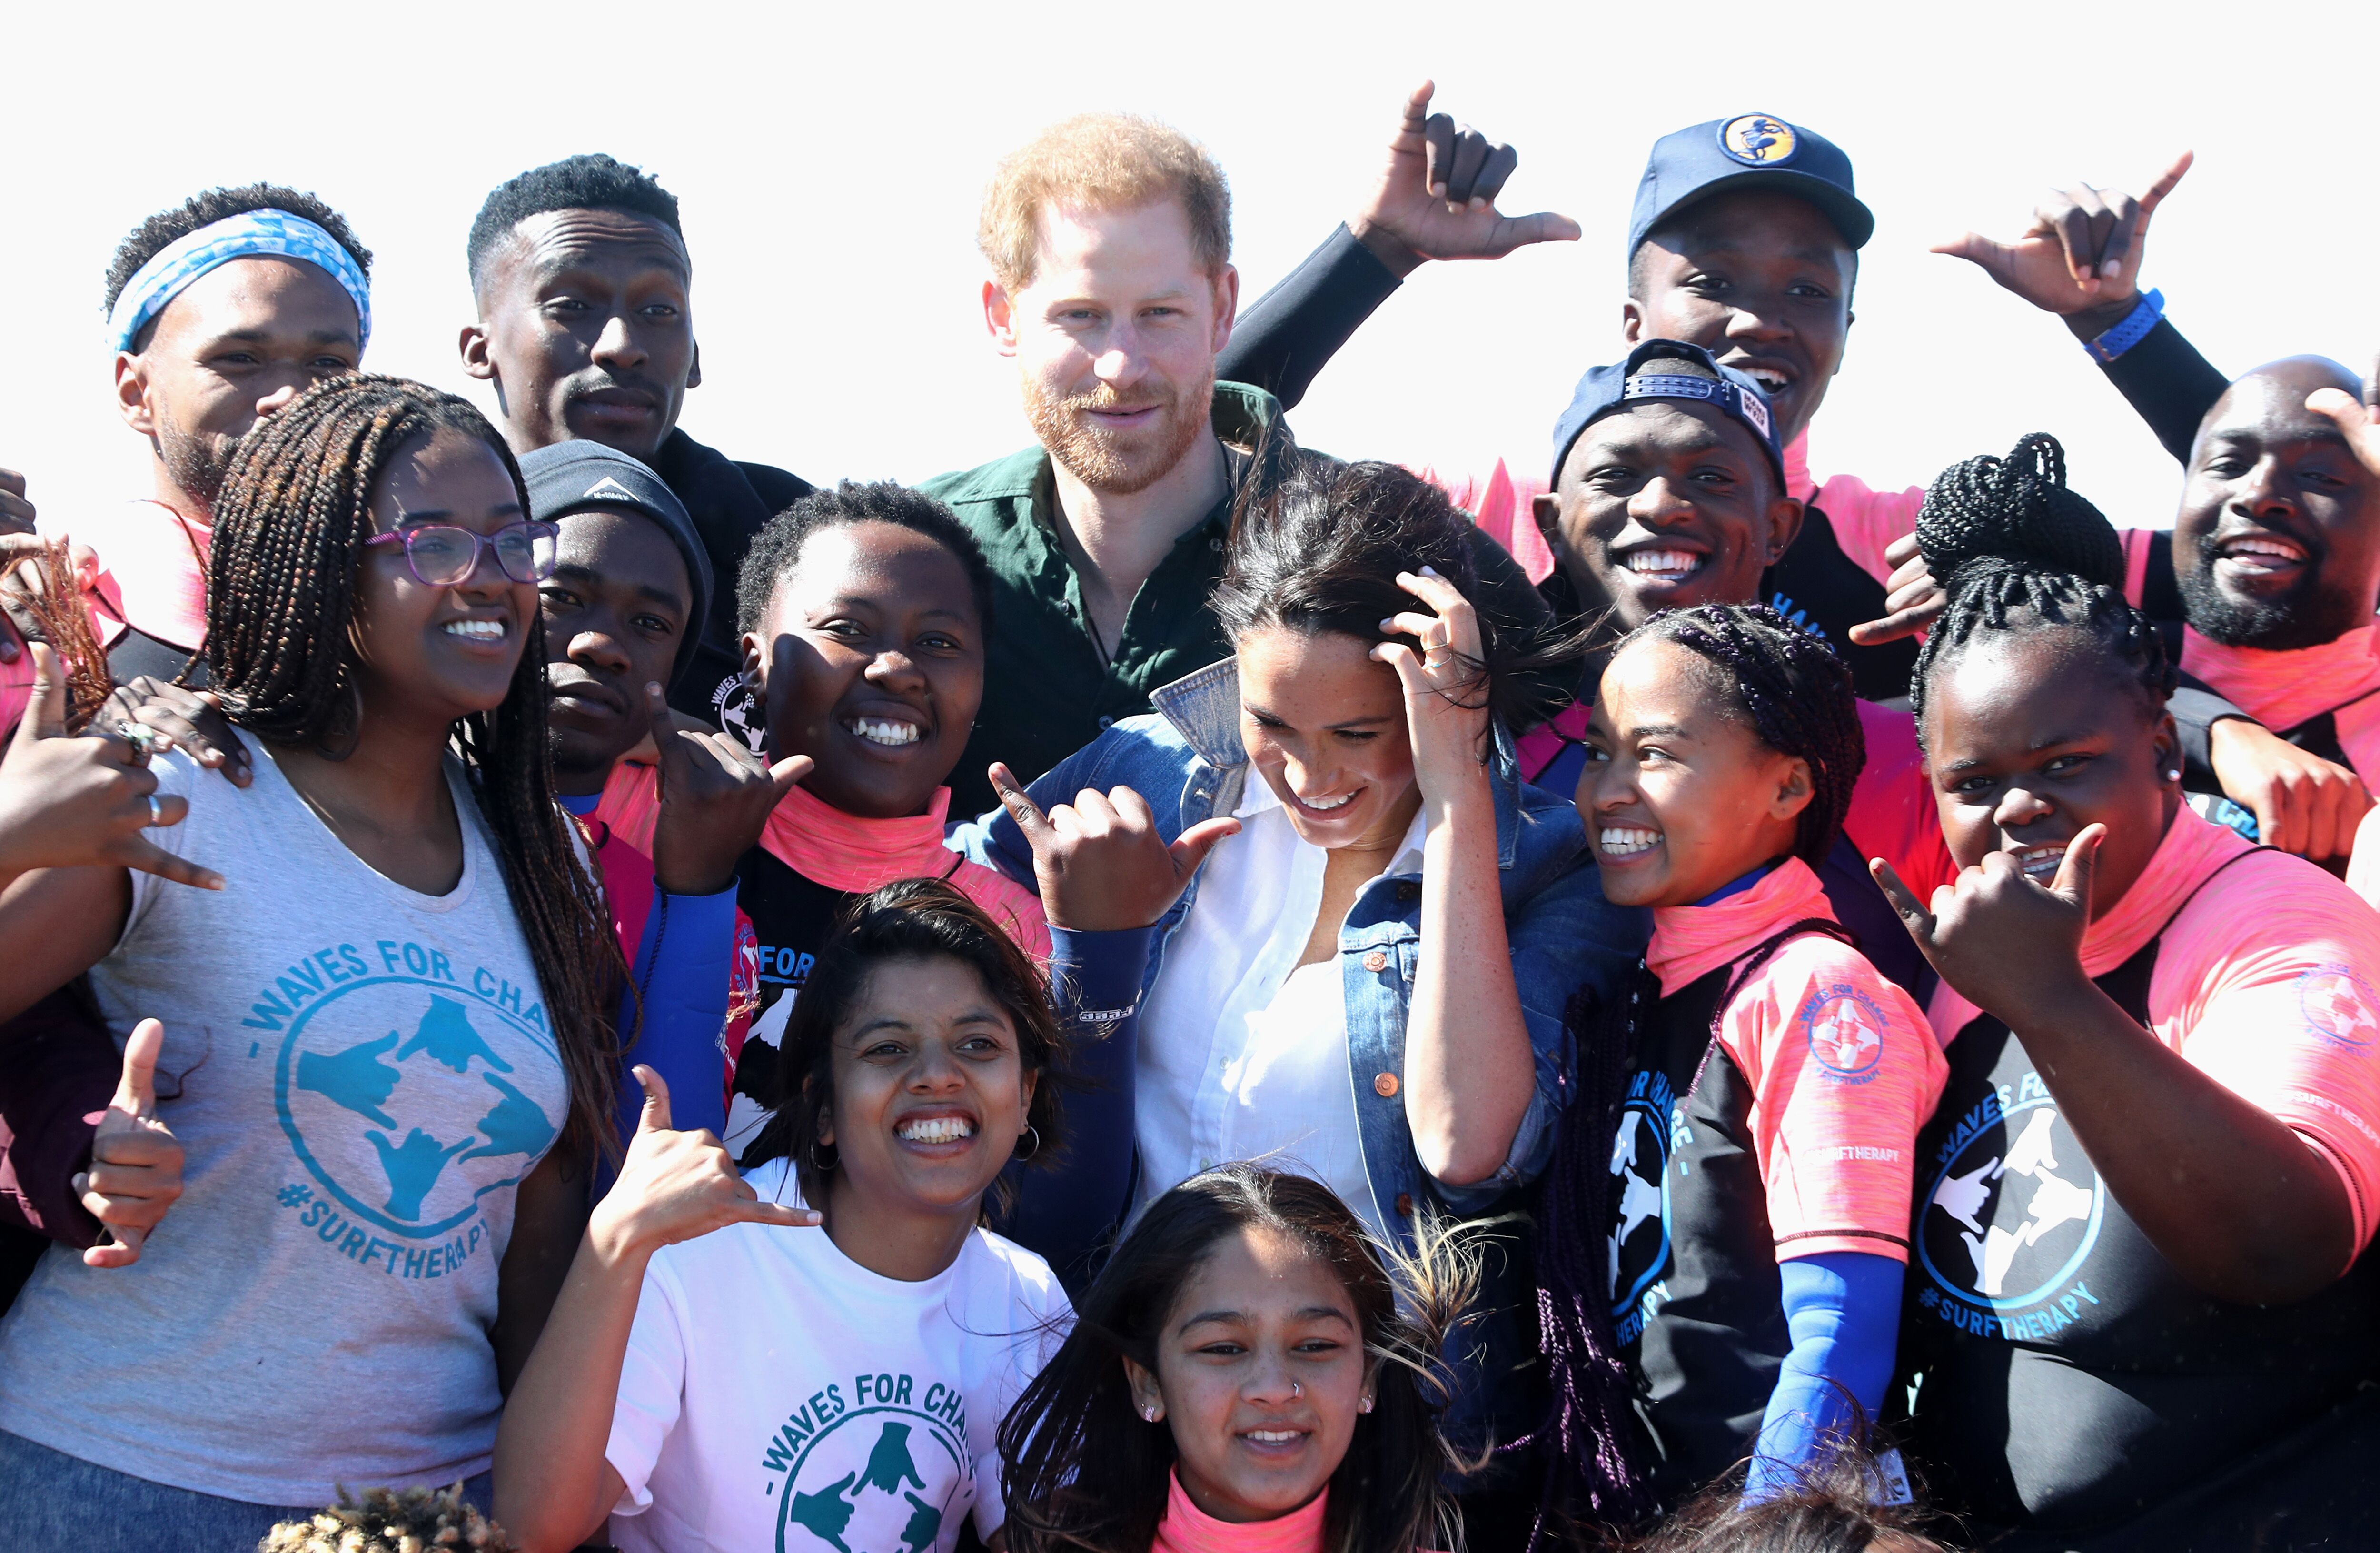 Prince Harry and Meghan Markle visit Waves for Change. | Source: Getty Images